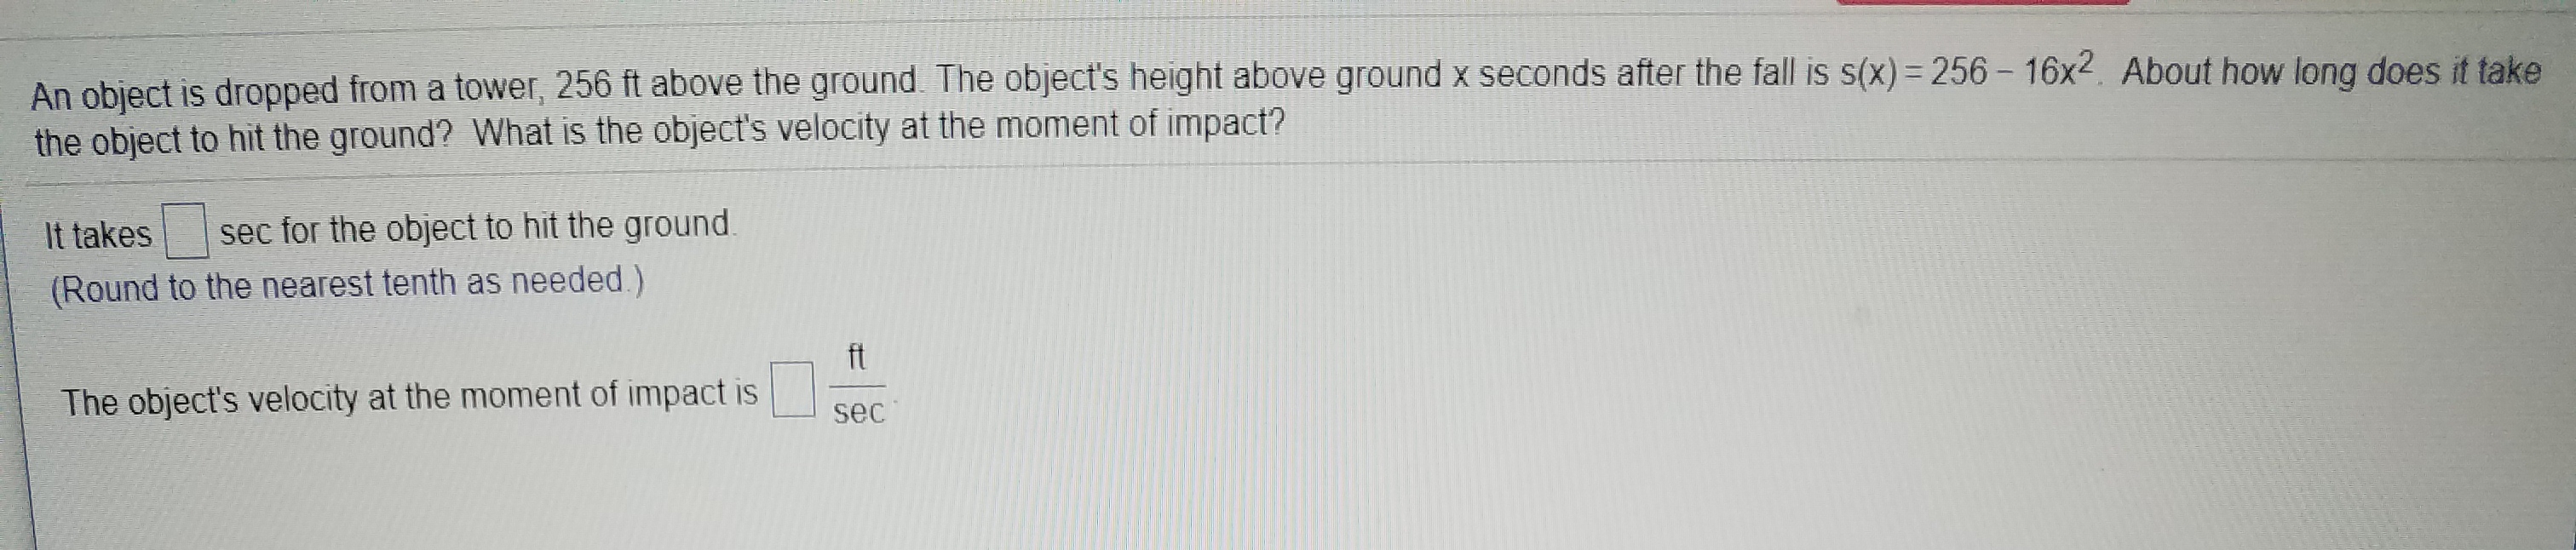 An object is dropped from a tower, 256 ft above the ground. The object's height above ground x seconds after the fall is s(x) 256-16x2. About how long does it take
the object to hit the ground? What is the object's velocity at the moment of impact?
sec for the object to hit the ground
It takes
(Round to the nearest tenth as needed.)
ft
The object's velocity at the moment of impact is
sec
